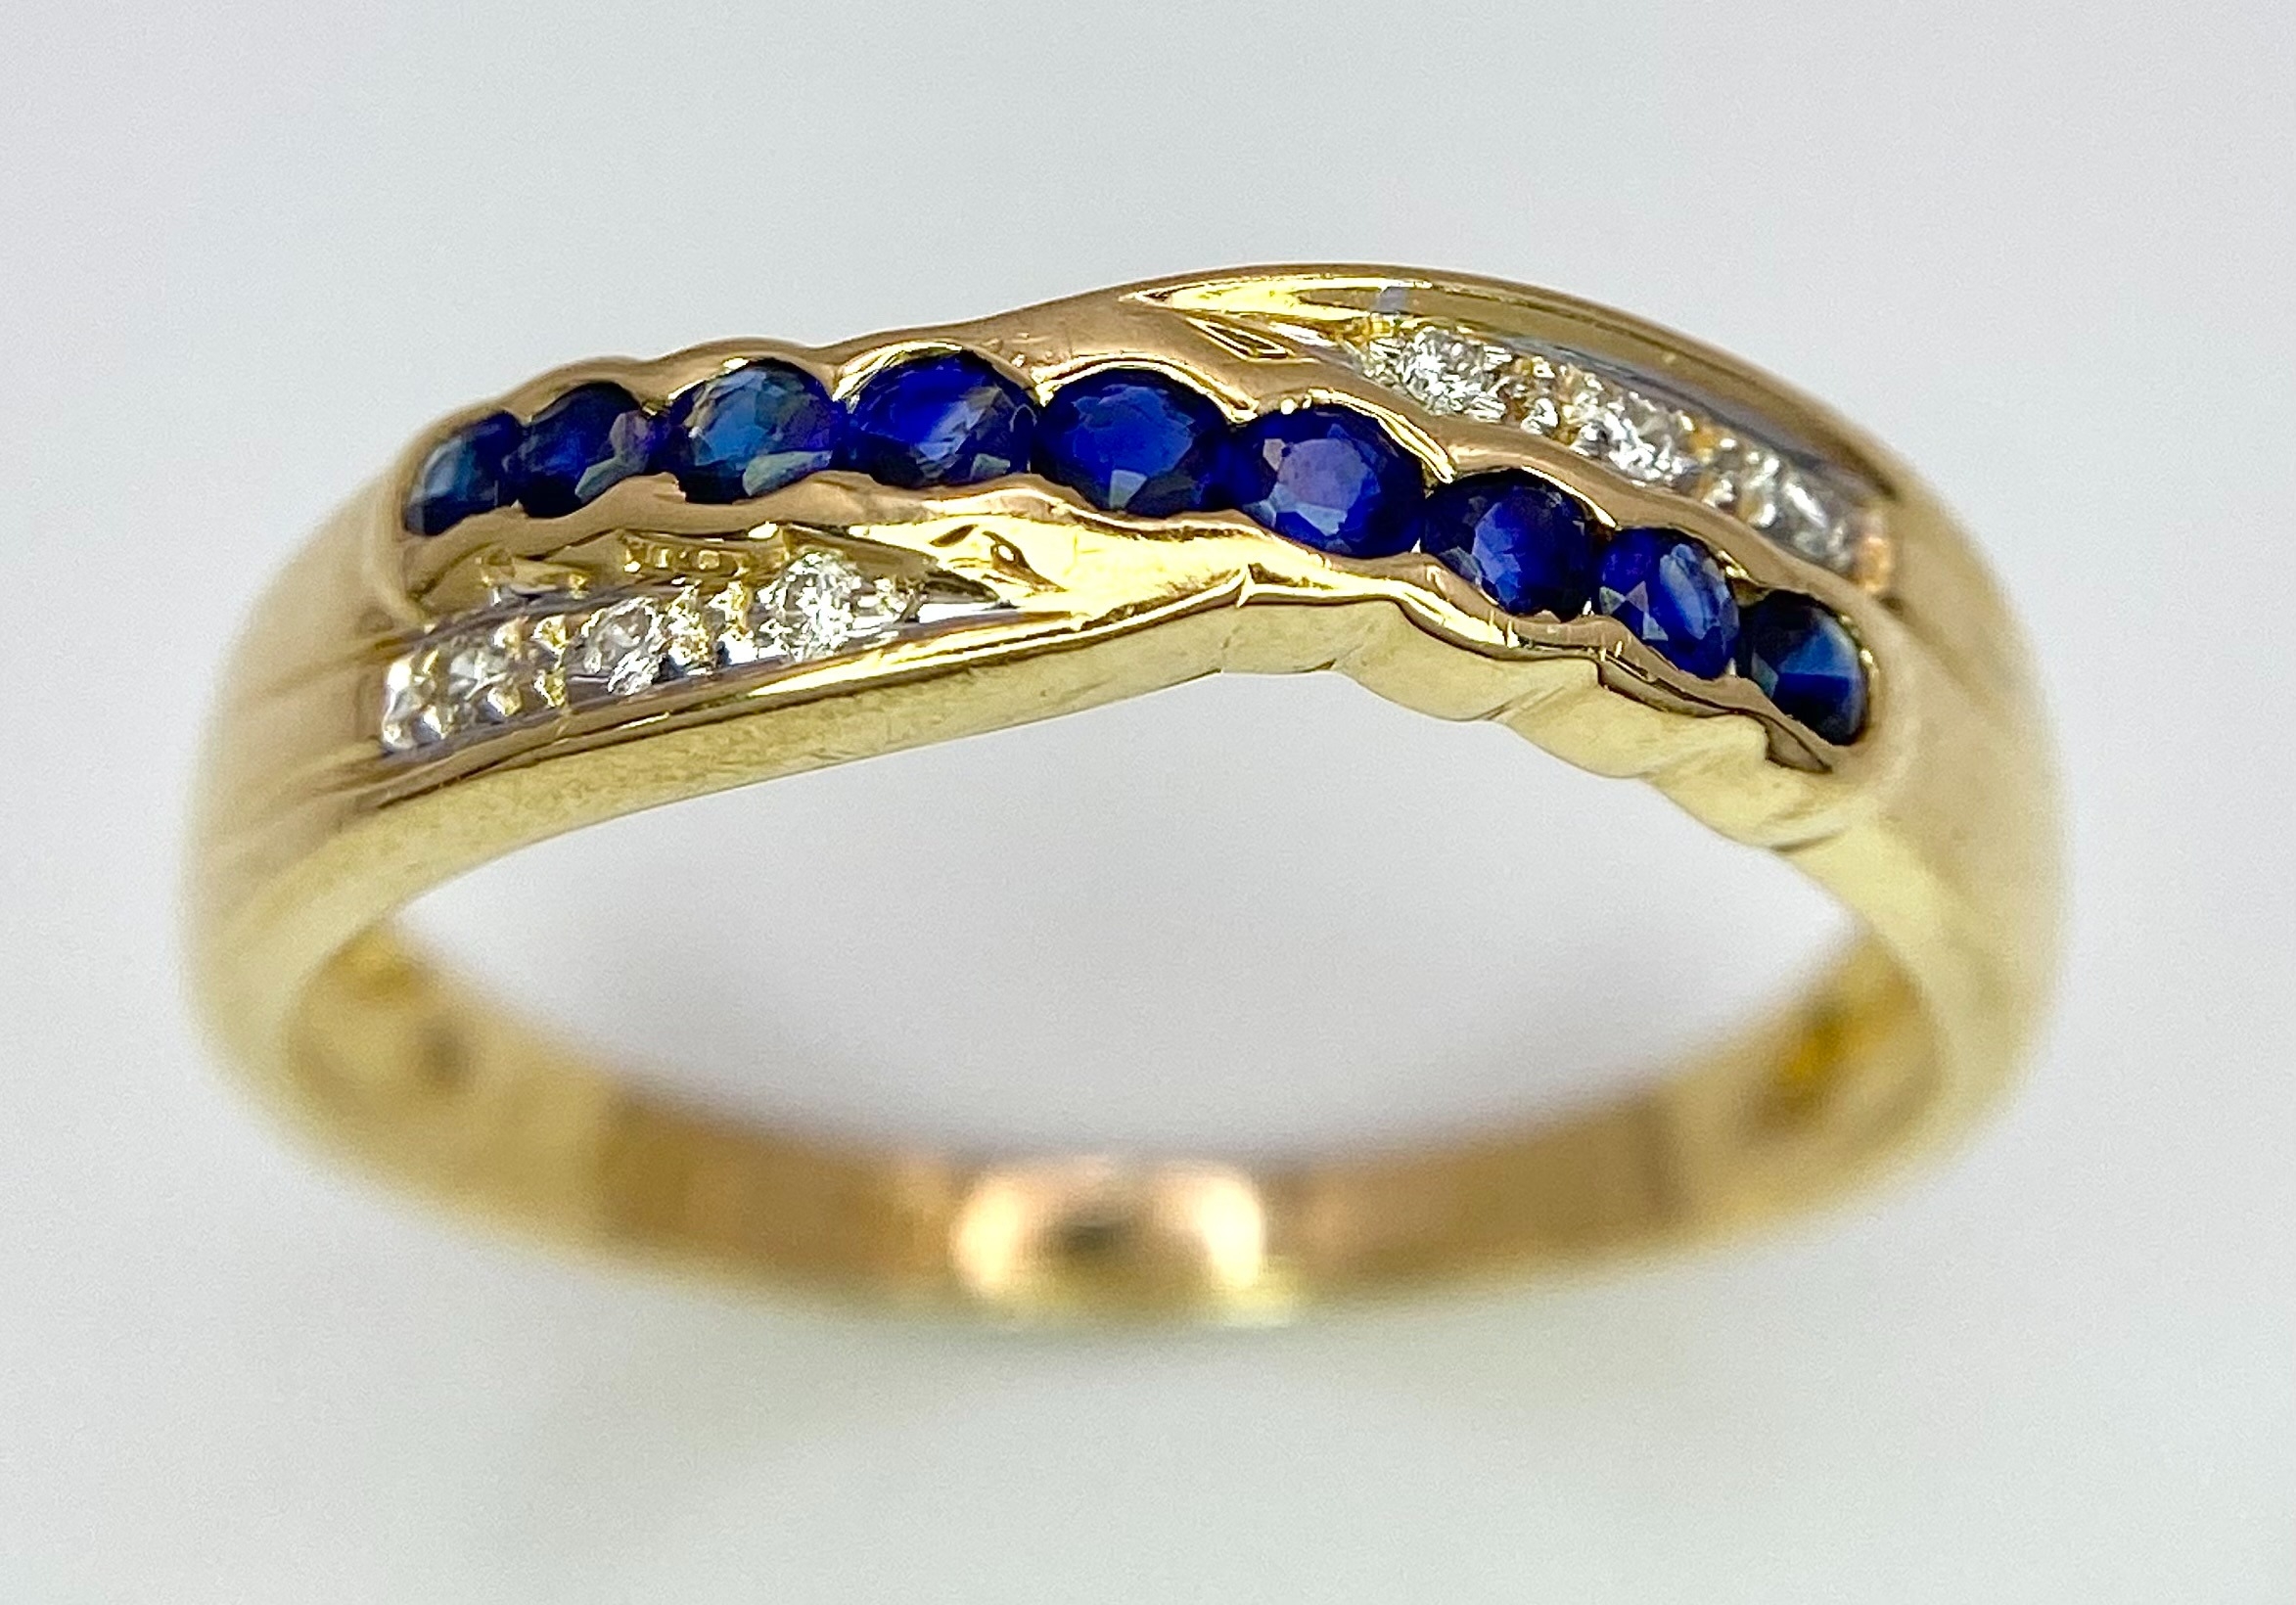 AN 18K YELLOW GOLD DIAMOND & BLUE STONE (PROBABLY SAPPHIRE) CROSSOVER RING. Size O, 2.7g total - Bild 2 aus 6